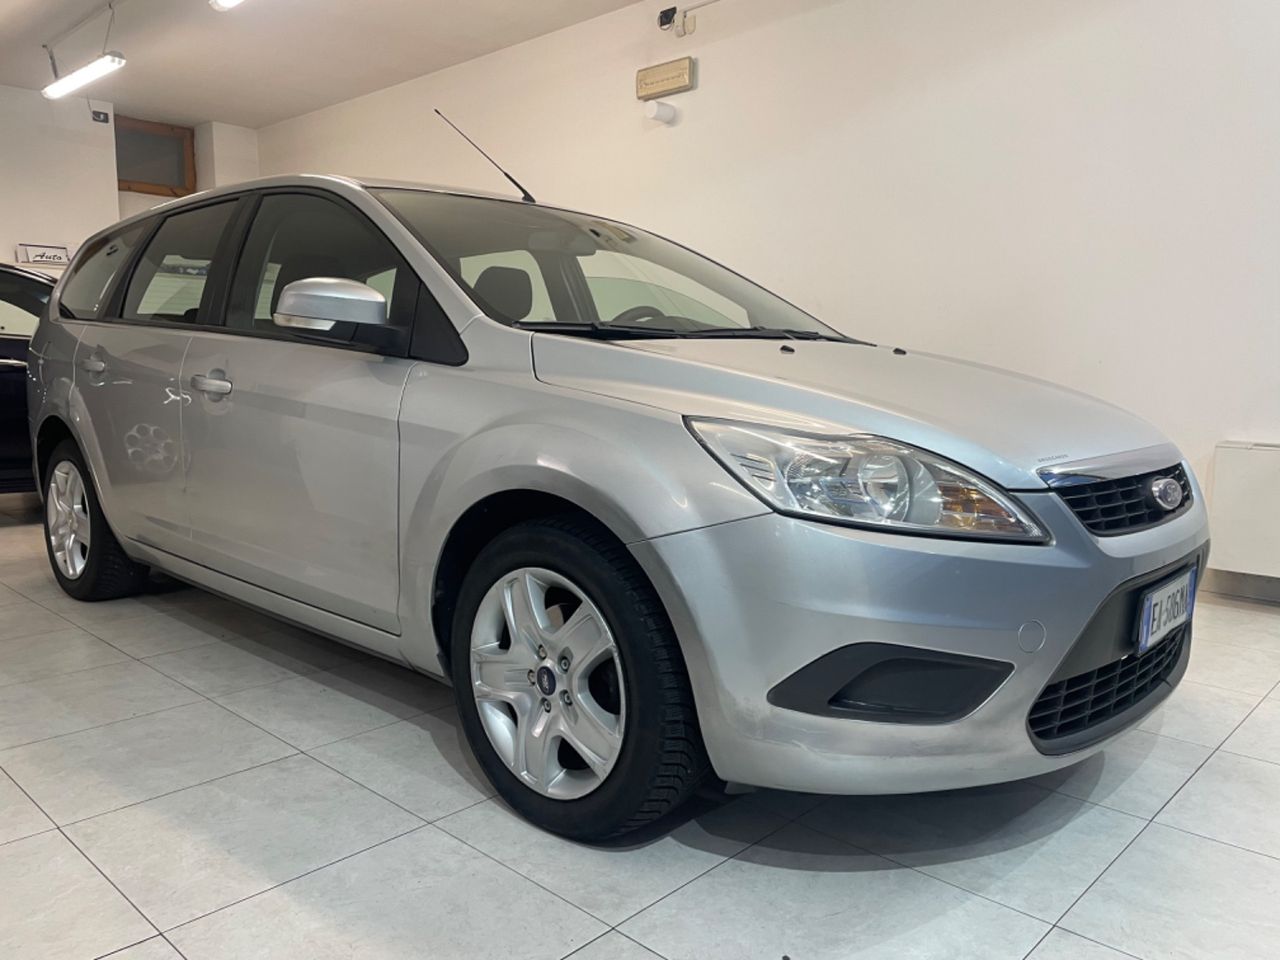 FORD FOCUS SW 1.6 tdci 66 kw